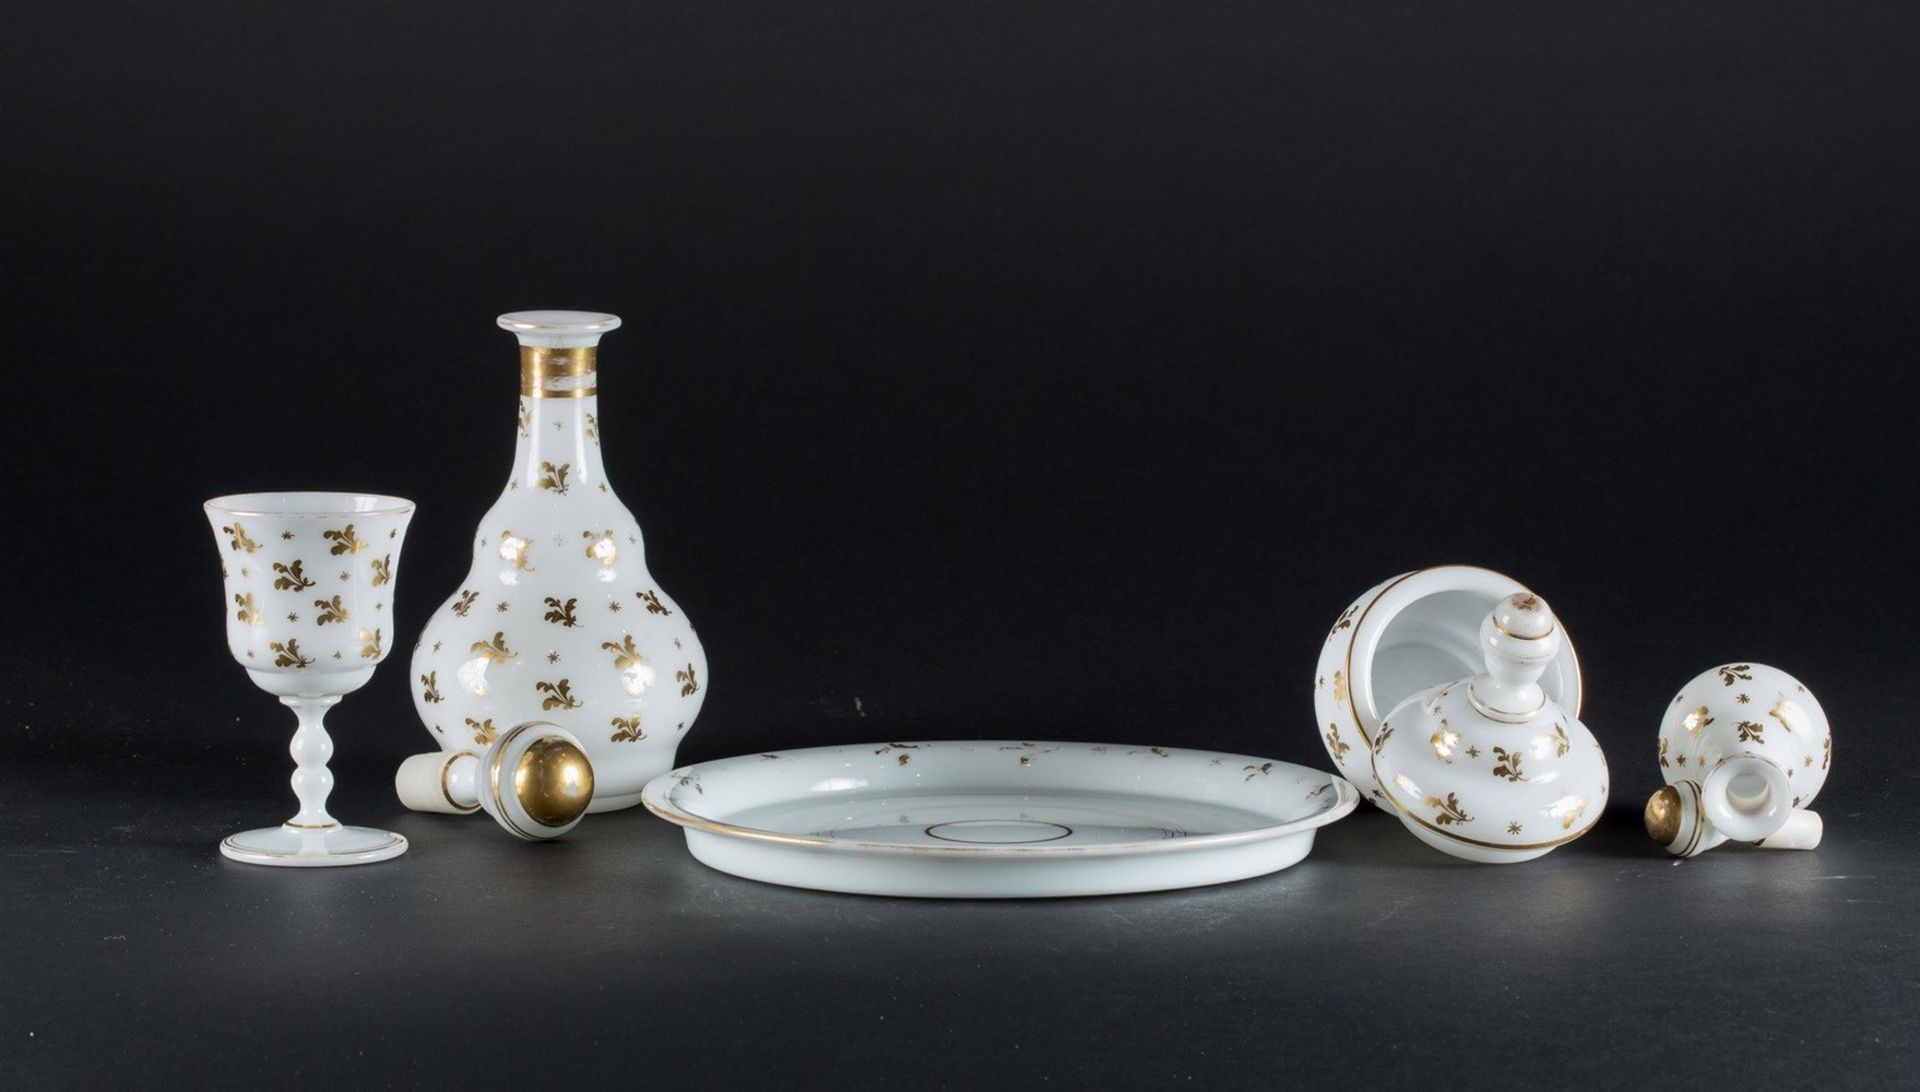 Arte Islamica A Beykoz white opaline glass night set with gilded floral decoration Turkey, 19th cen - Image 4 of 4